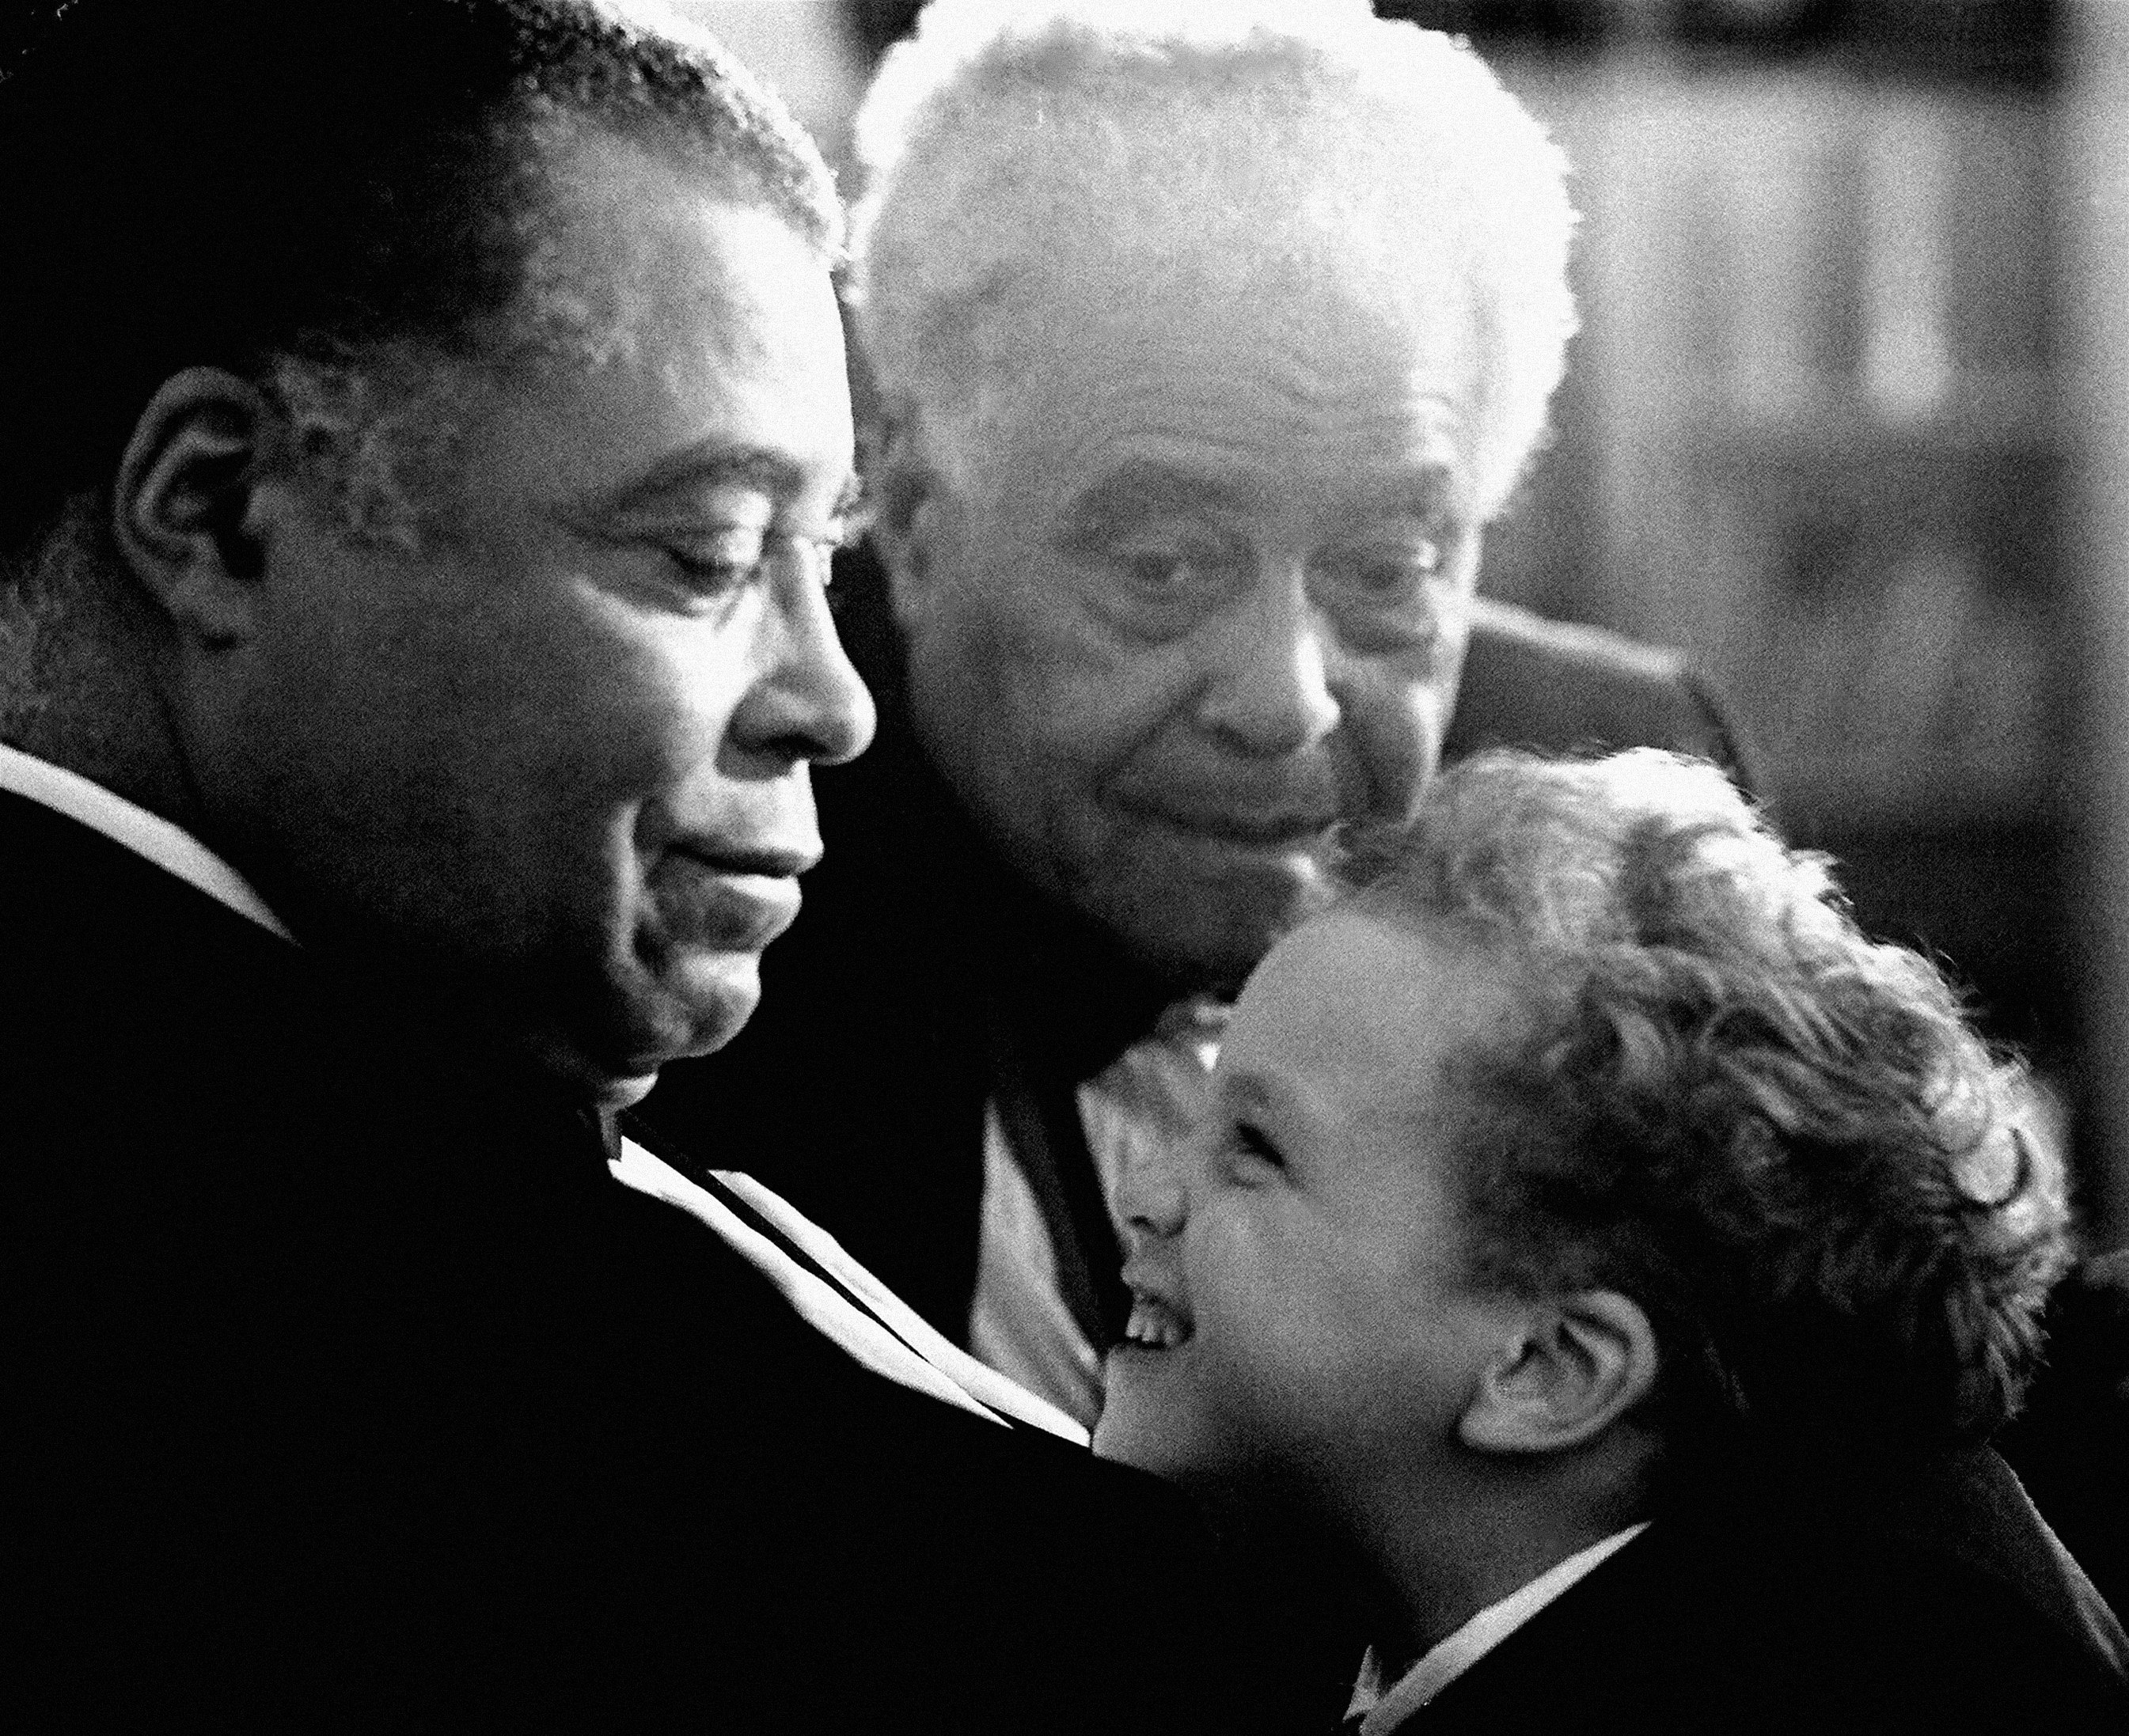 James, his father Robert, and James' son Fynn Earl Jones in 1987 at the star's residence in New York. | Source: Getty Images